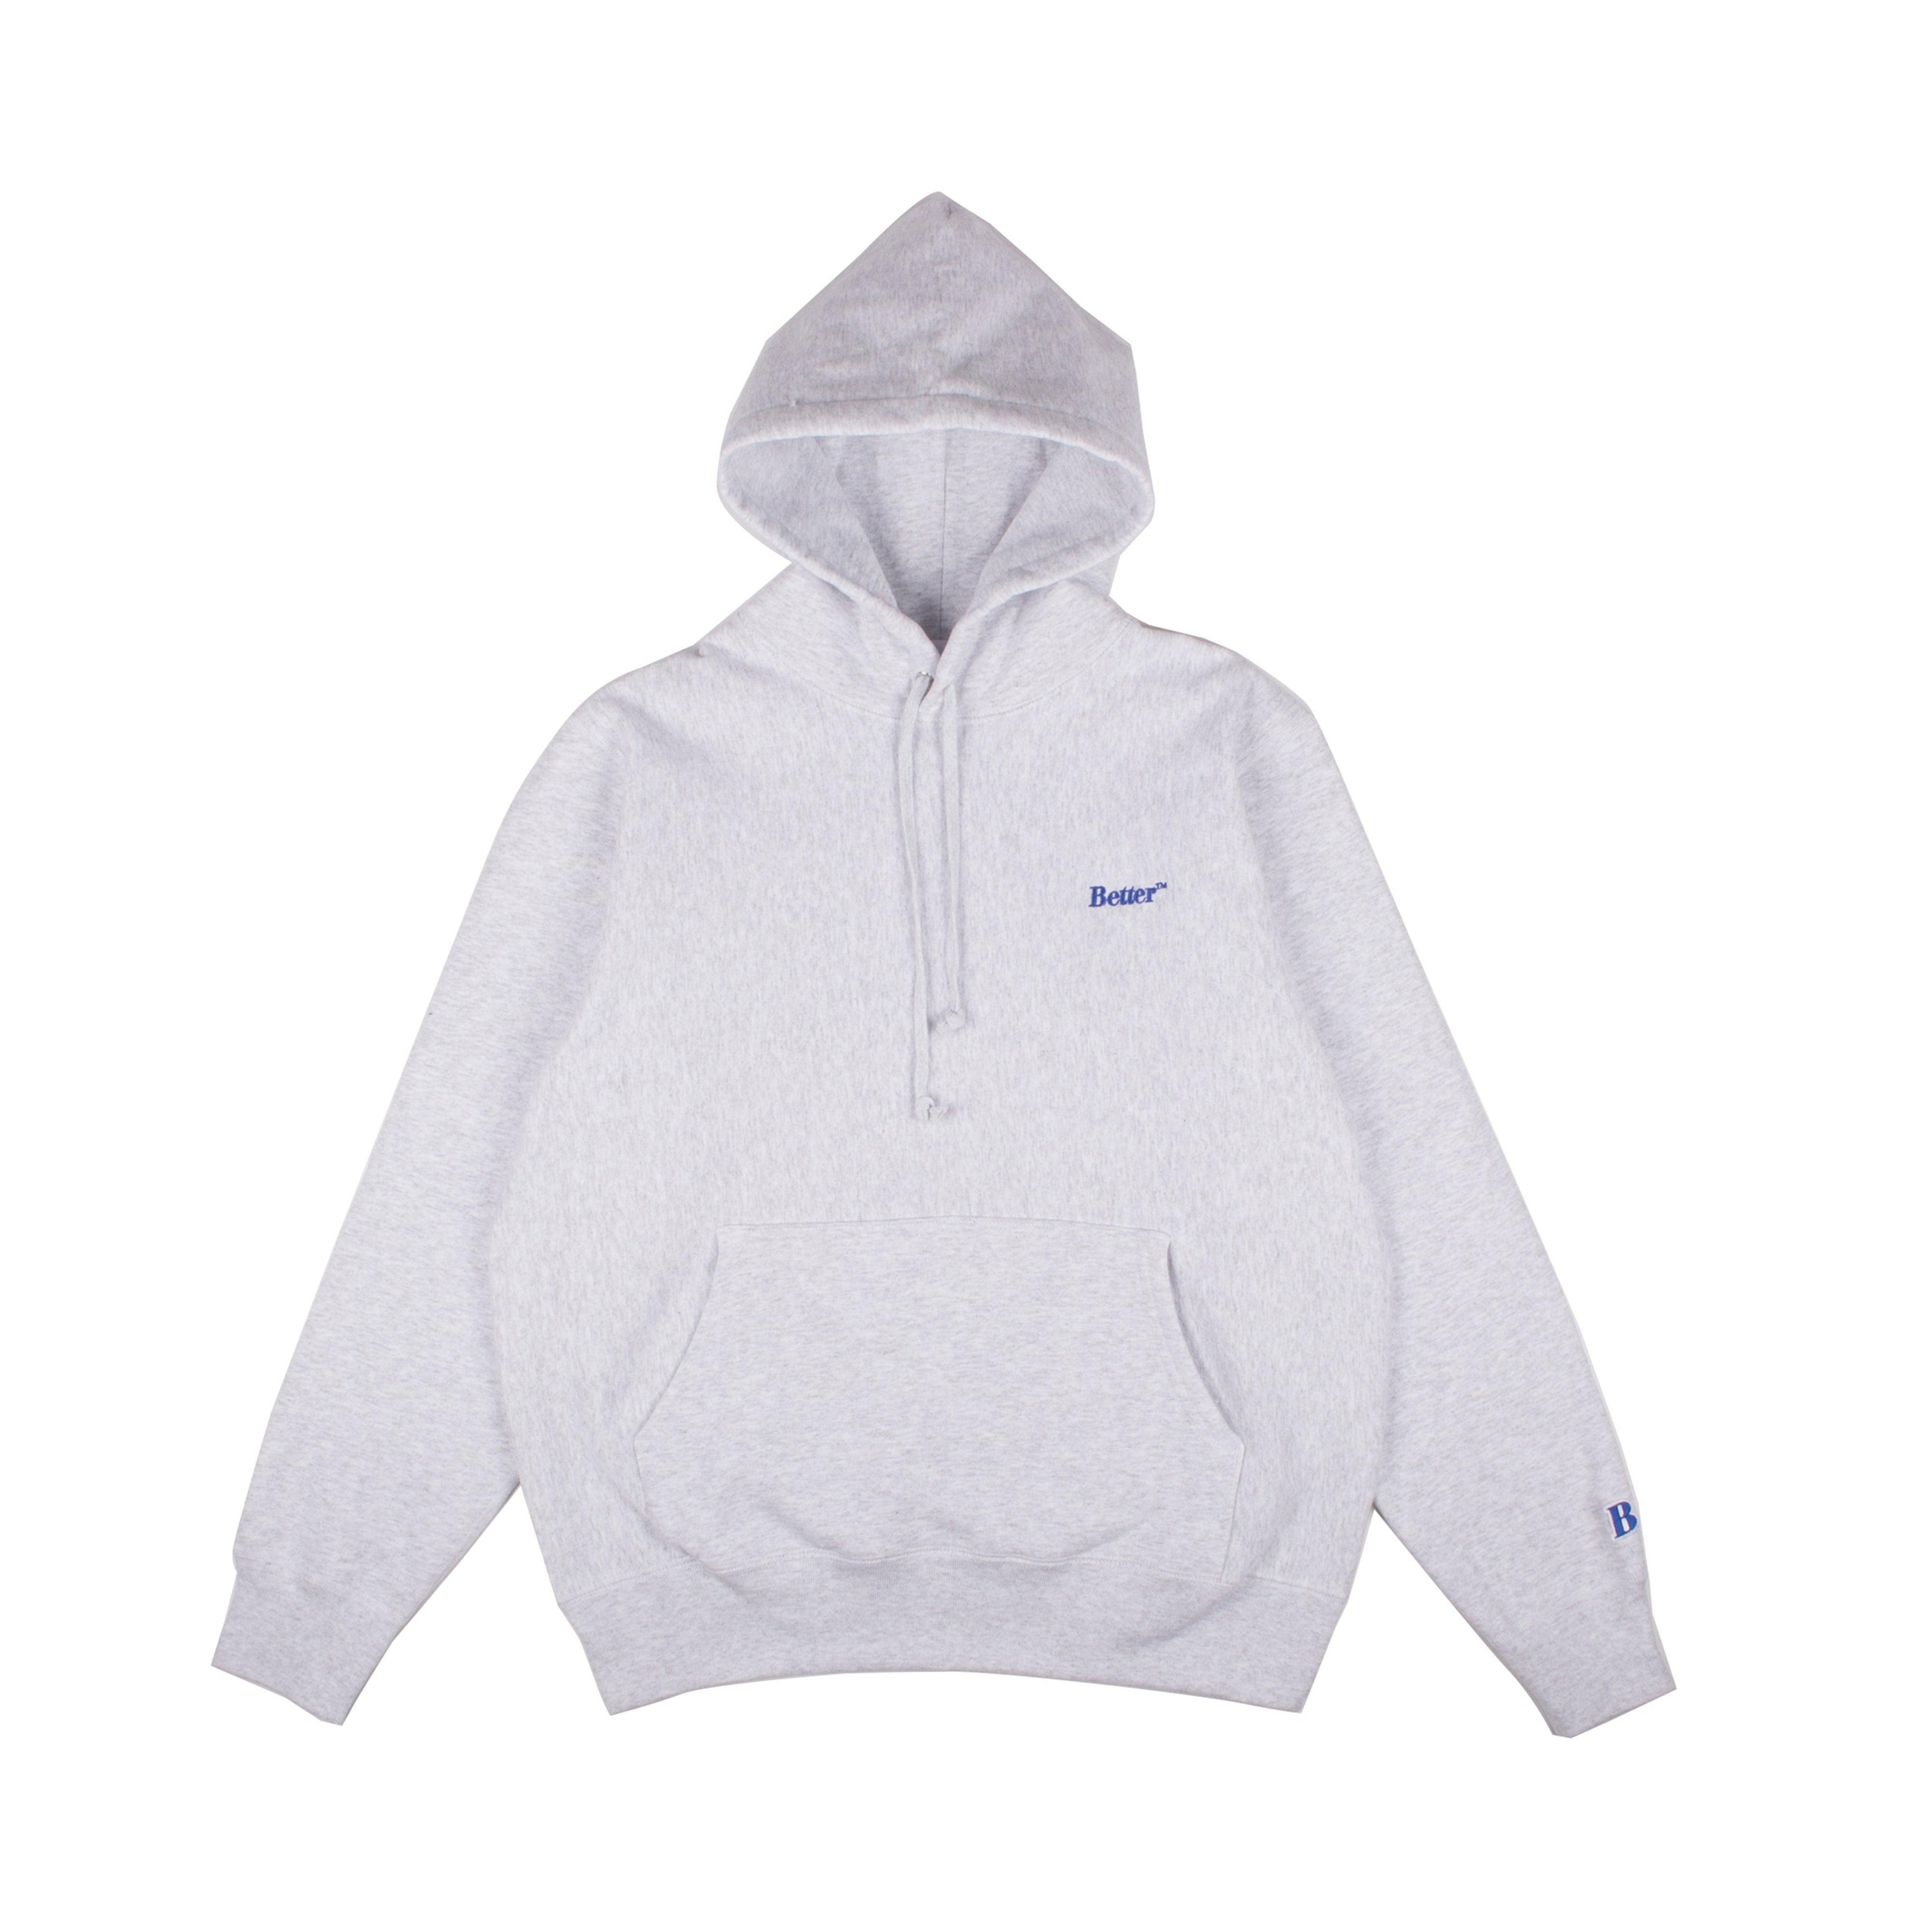 Better™ Gift Shop Logo Hoodie (Ash Heather) by BETTER GIFT SHOP